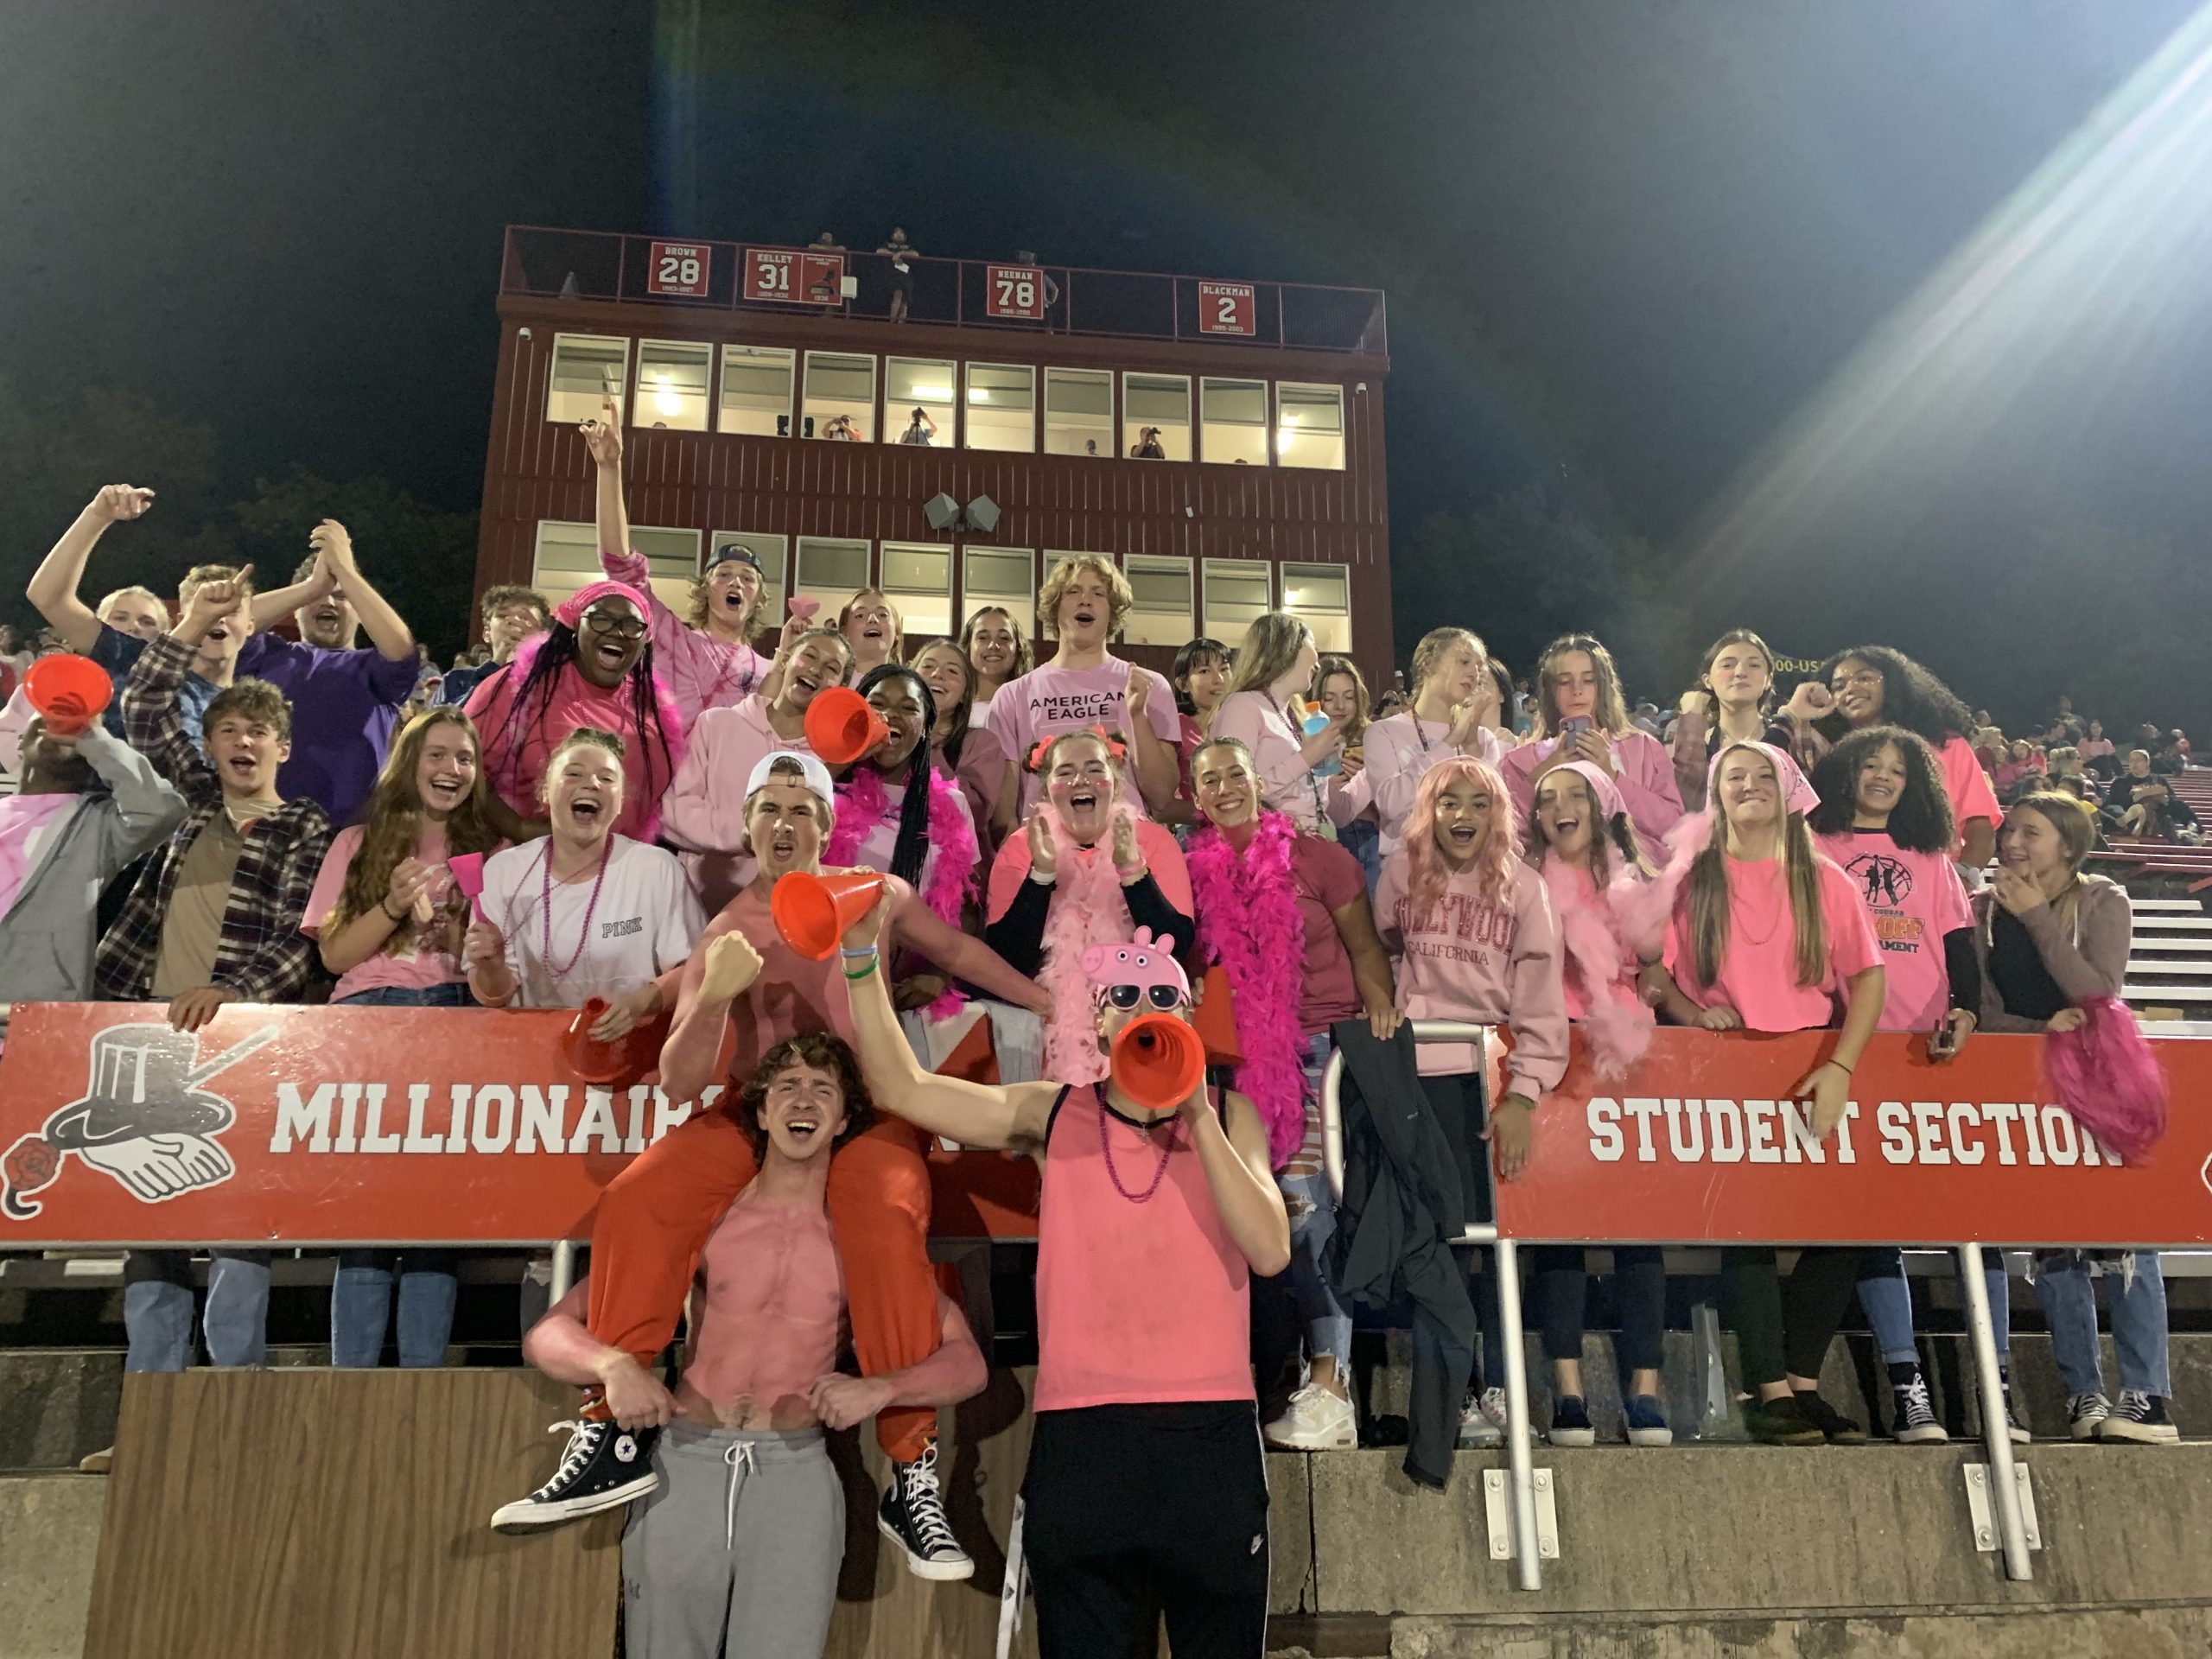 Through events such as the pink out for breast cancer awareness, the students at WAHS have been able to express themselves and support one another in a way that has not been possible for many years due to COVID-19.